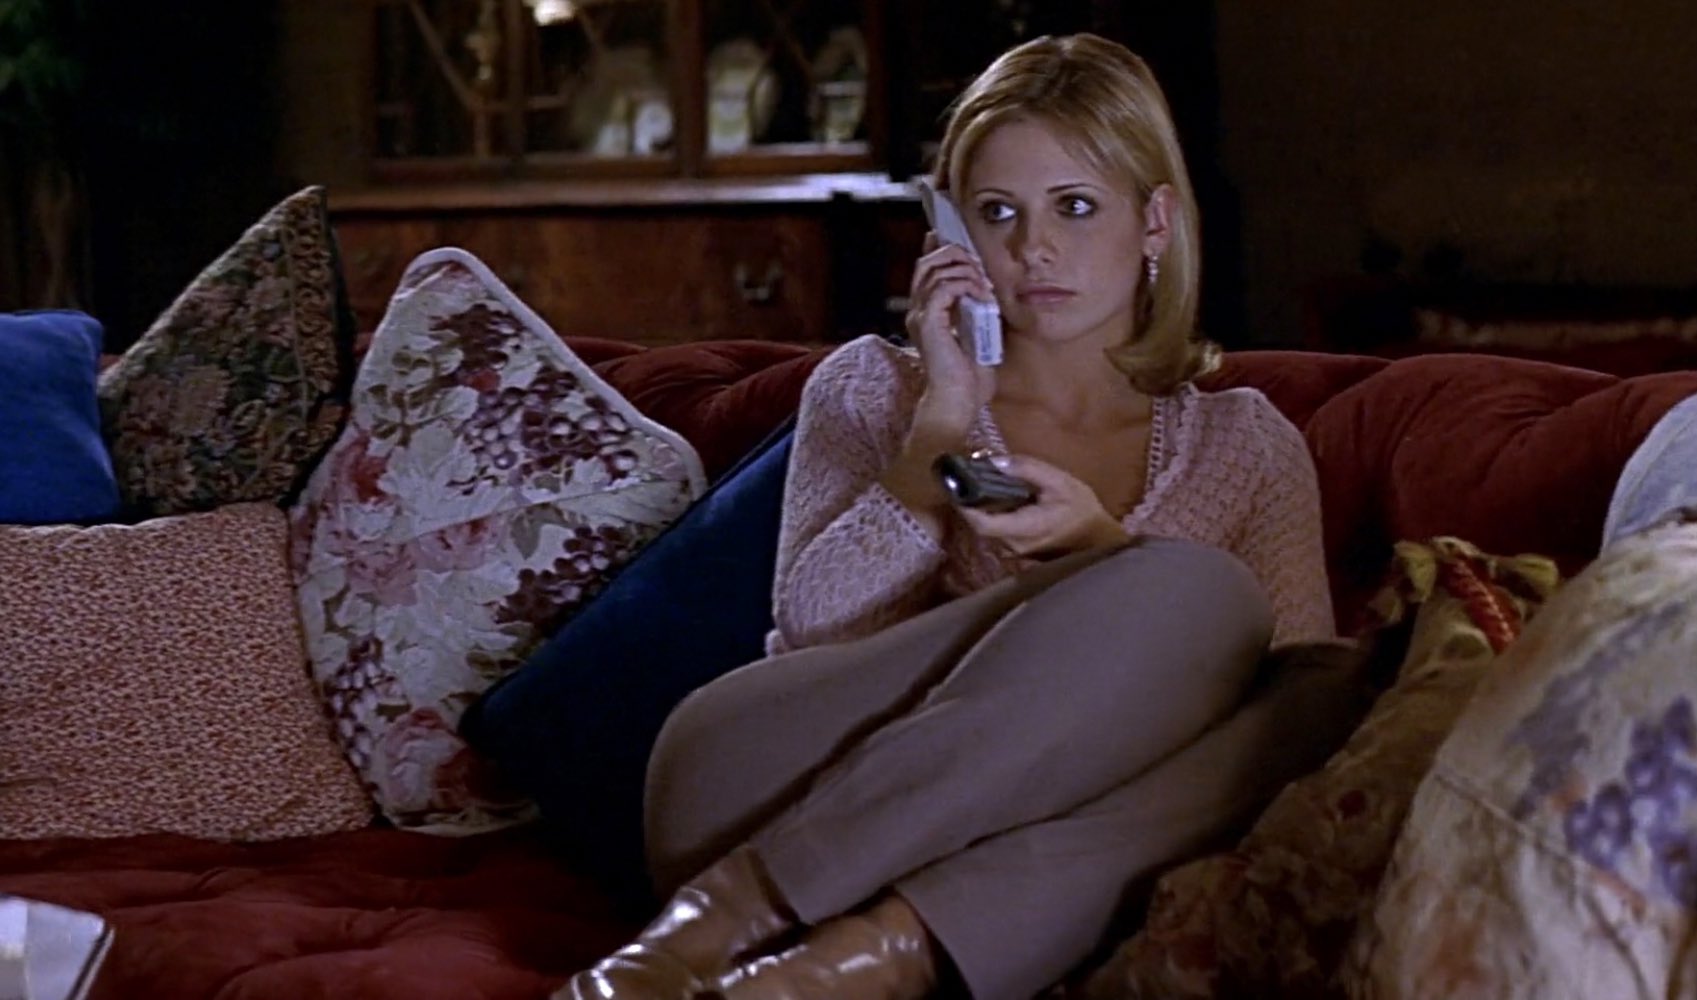 Happy birthday to the queen of the late 90s/early 2000s, Sarah Michelle Gellar 